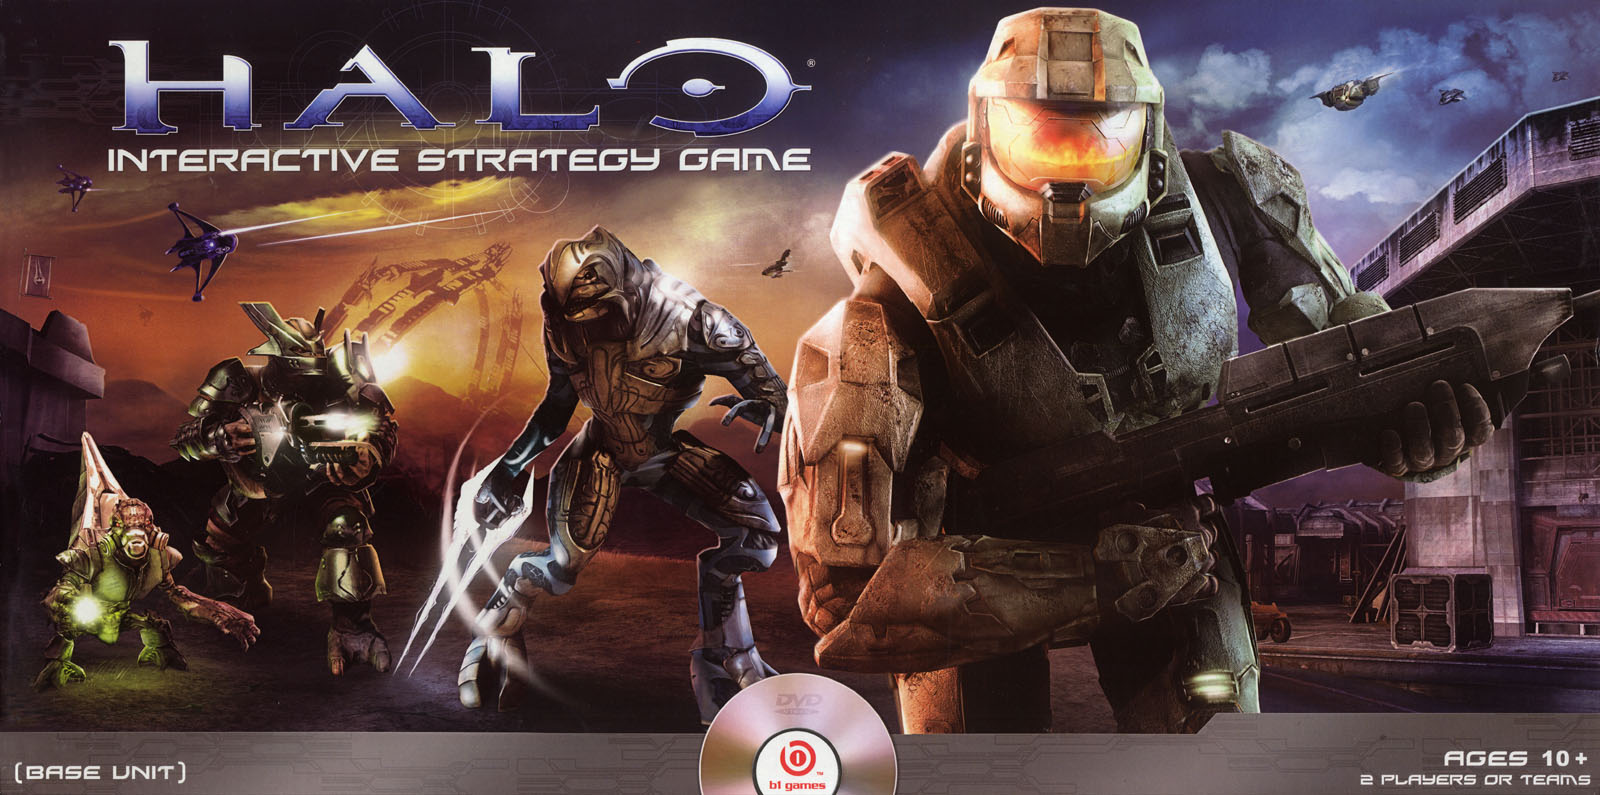  Halo: The Interactive Strategy Game [with Board Game] [DVD] [2008]